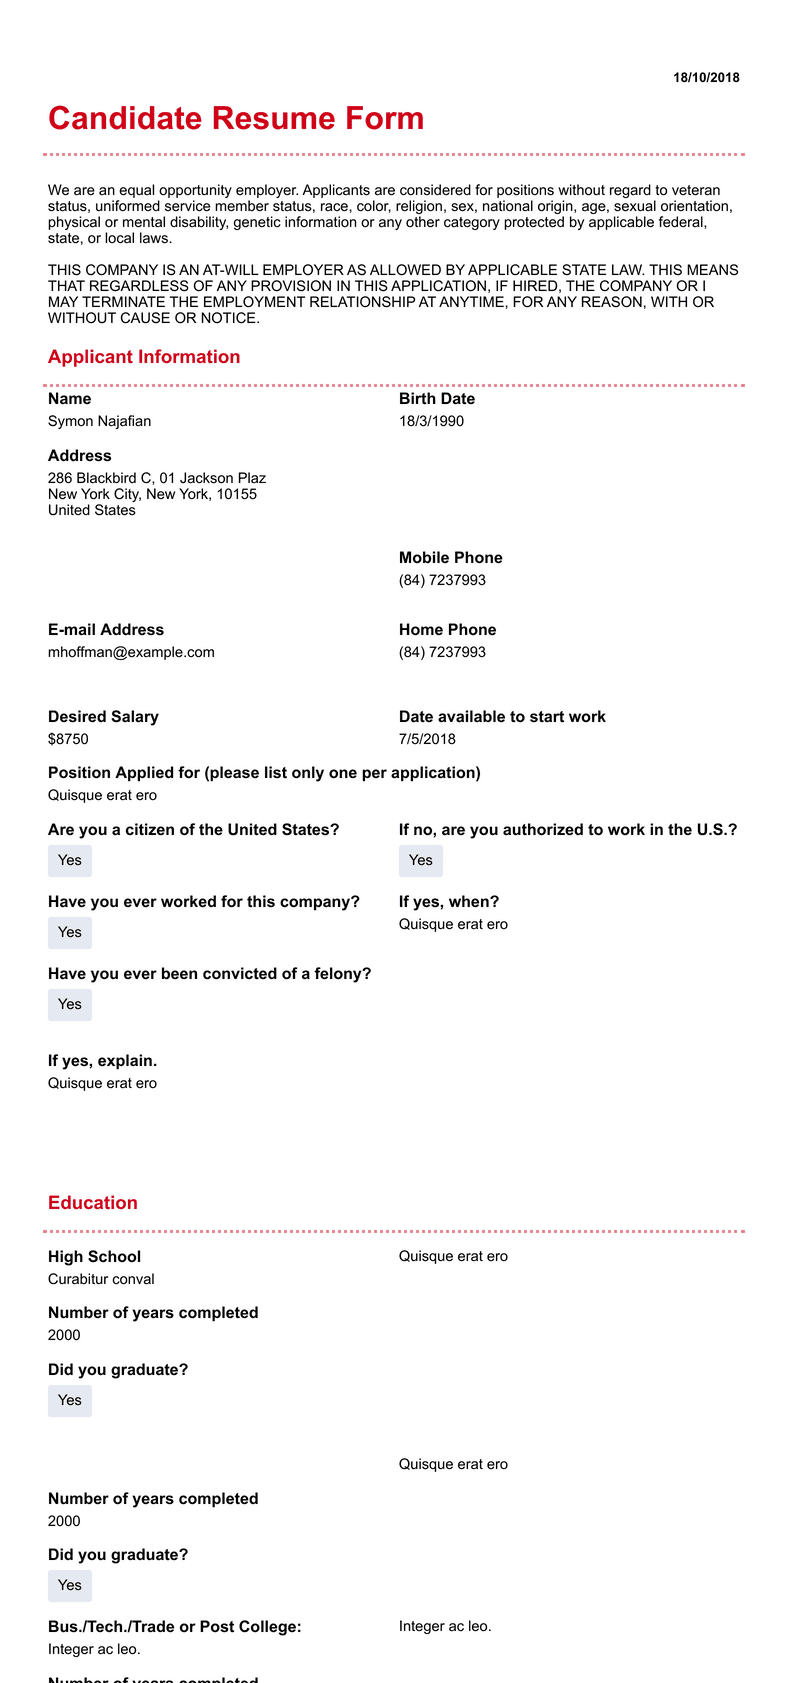 Candidate Resume Template